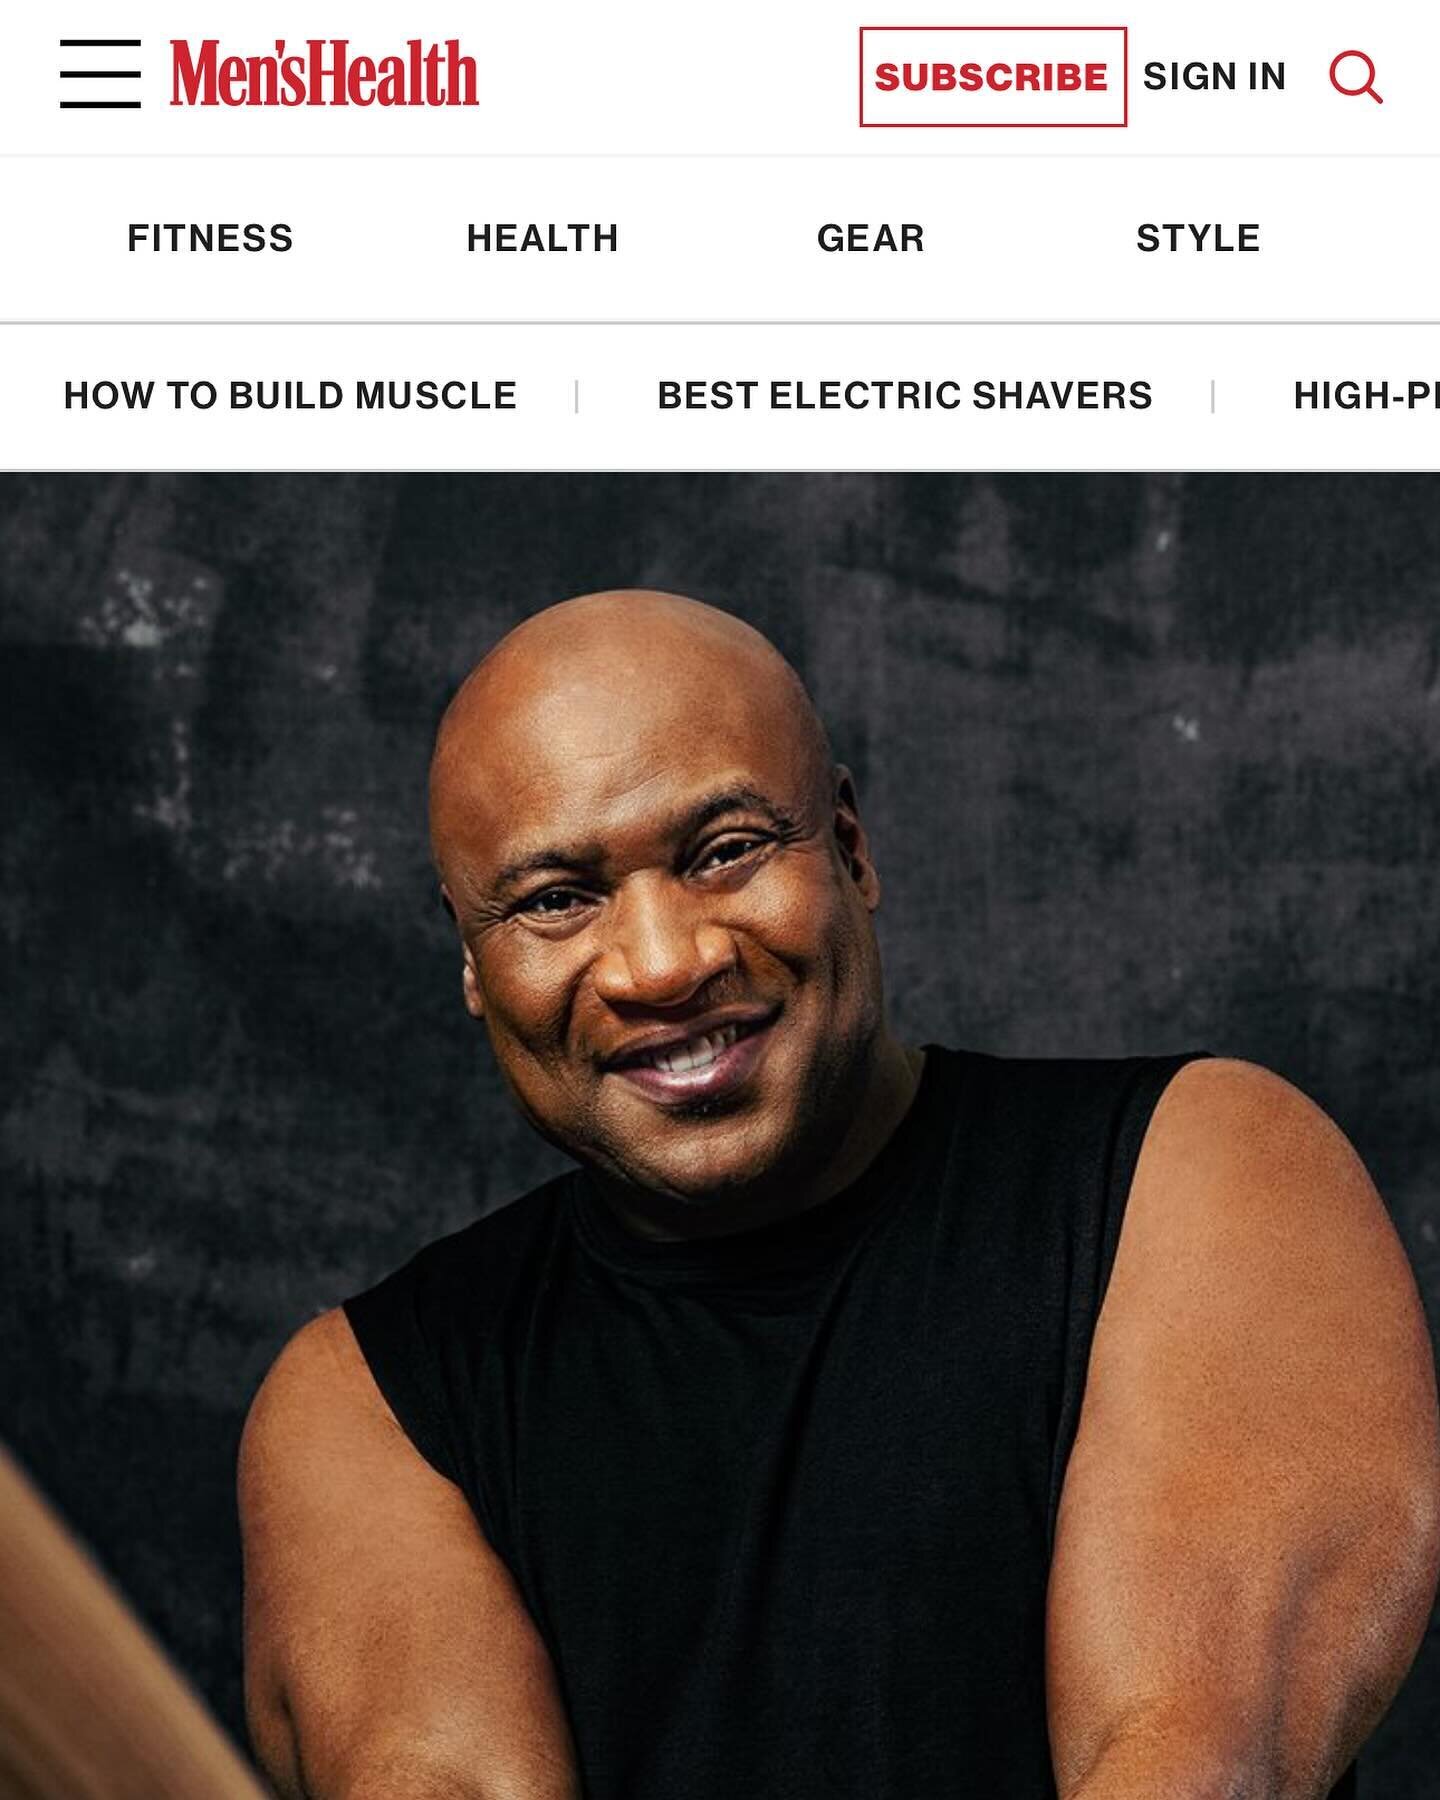 My profile of the man, the myth, the legend&mdash;the humble  human Vincent Edward &ldquo;Bo&rdquo;Jackson is live on @menshealthmag. It was a true honor. Peep the opening on the next slide and a few of my BTS shots. #boknows #litlifeislife